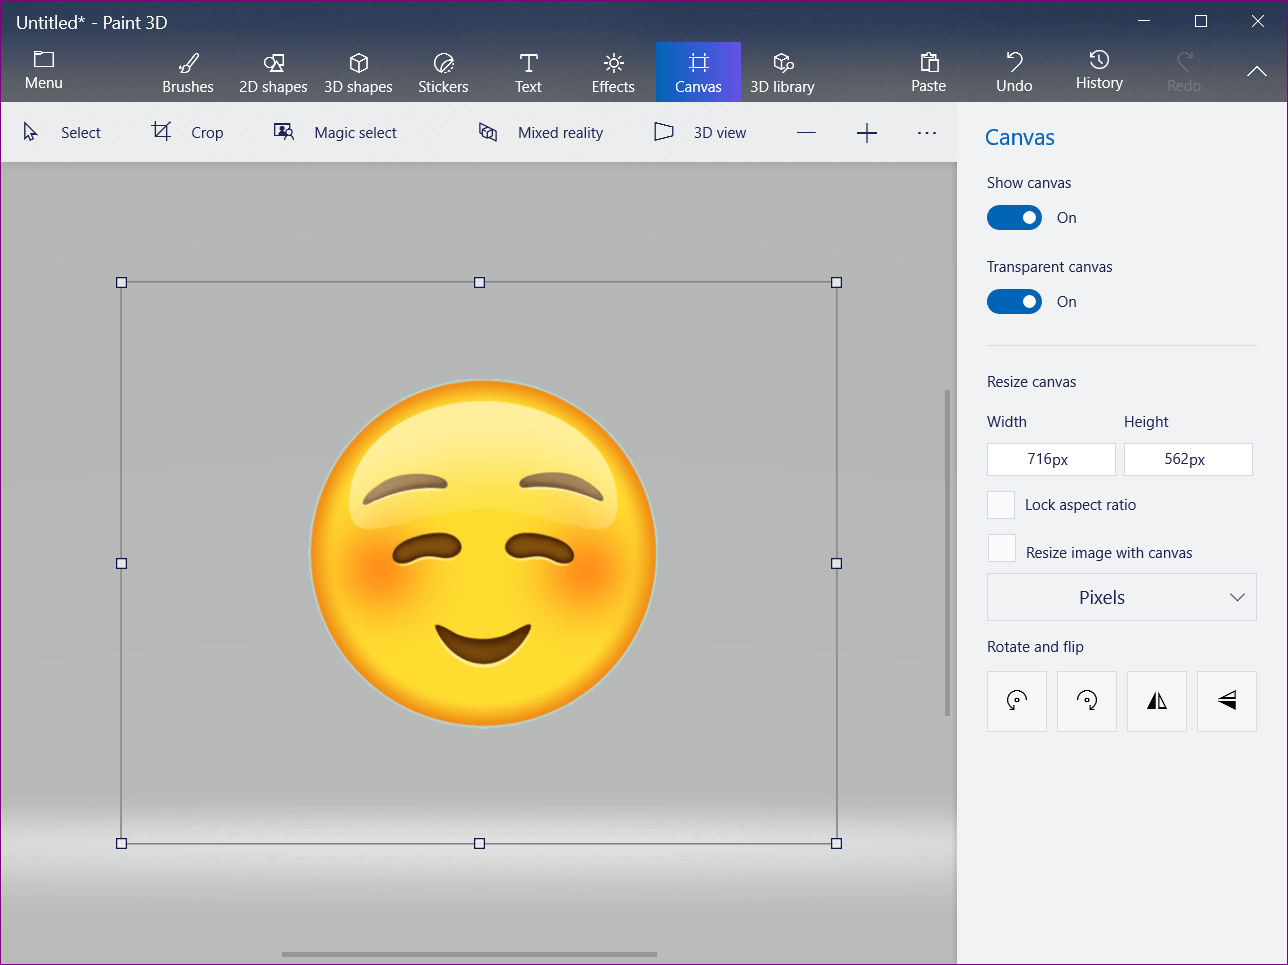 How to Make Background Transparent in Paint 3D